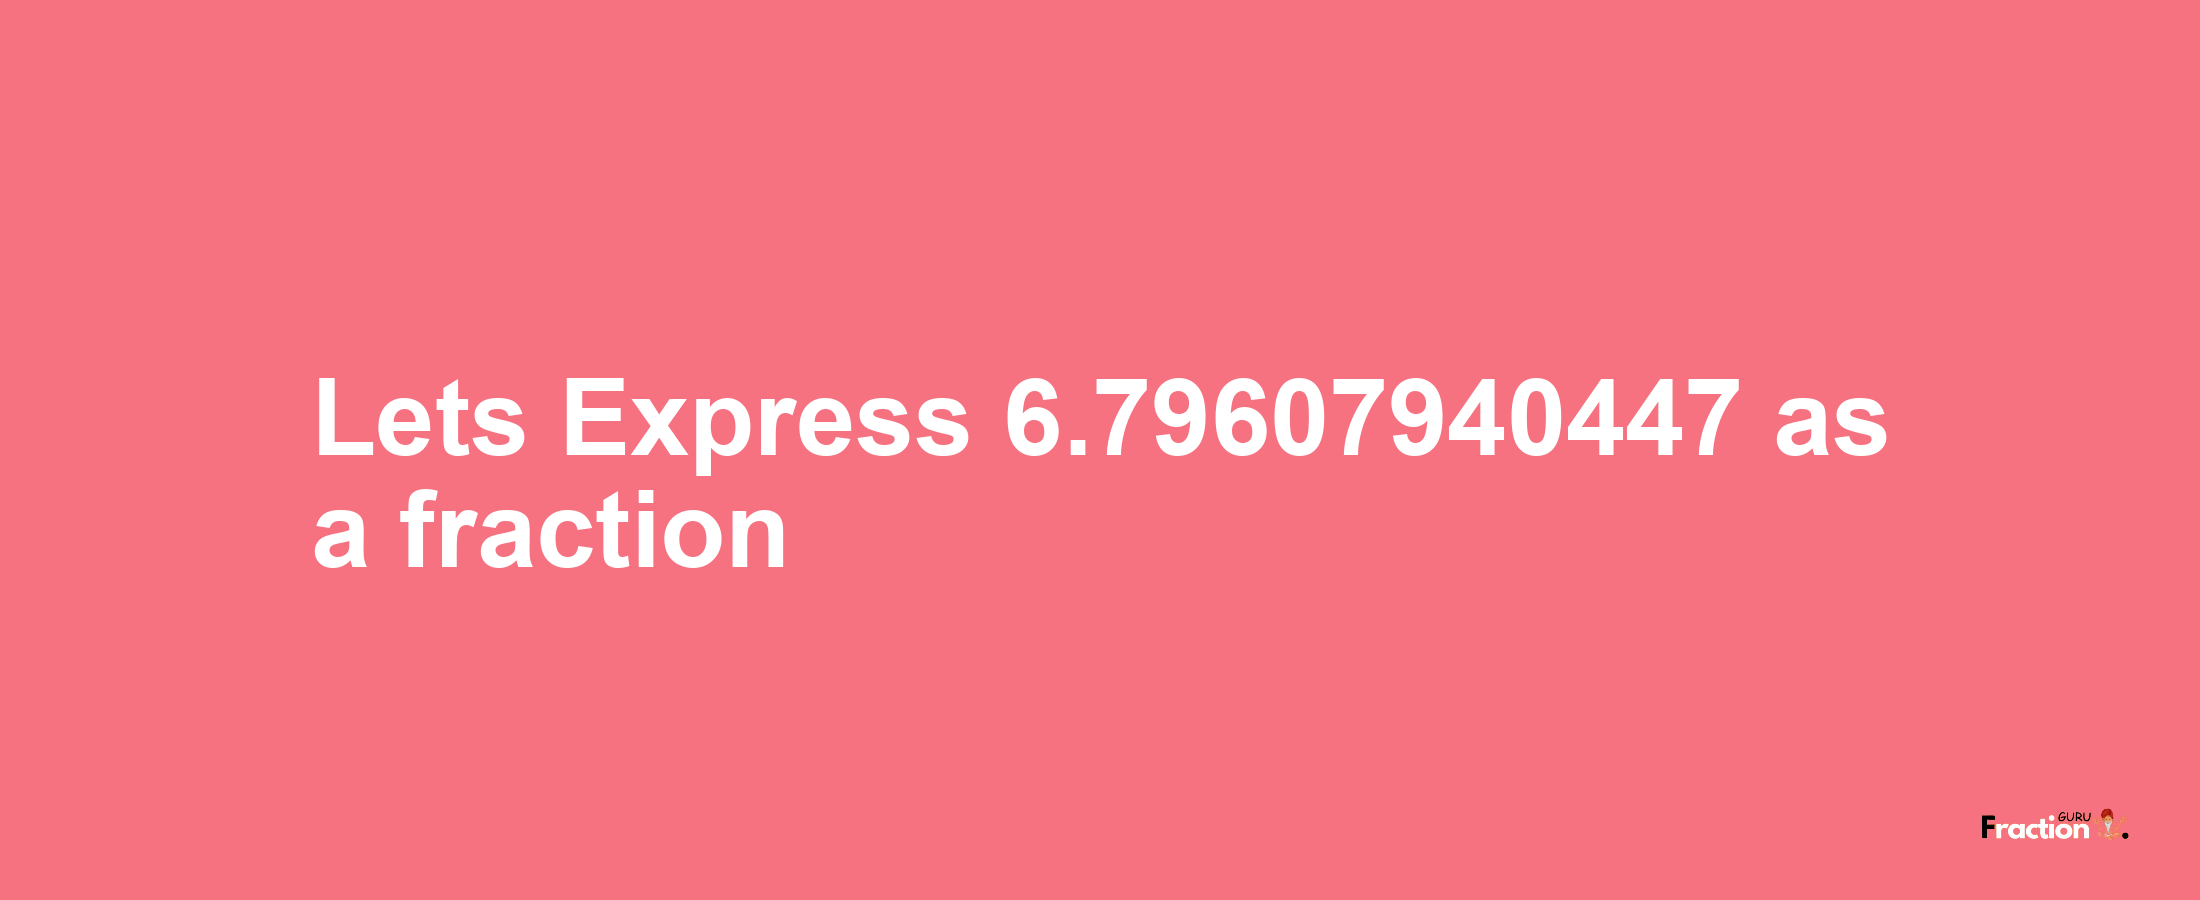 Lets Express 6.79607940447 as afraction